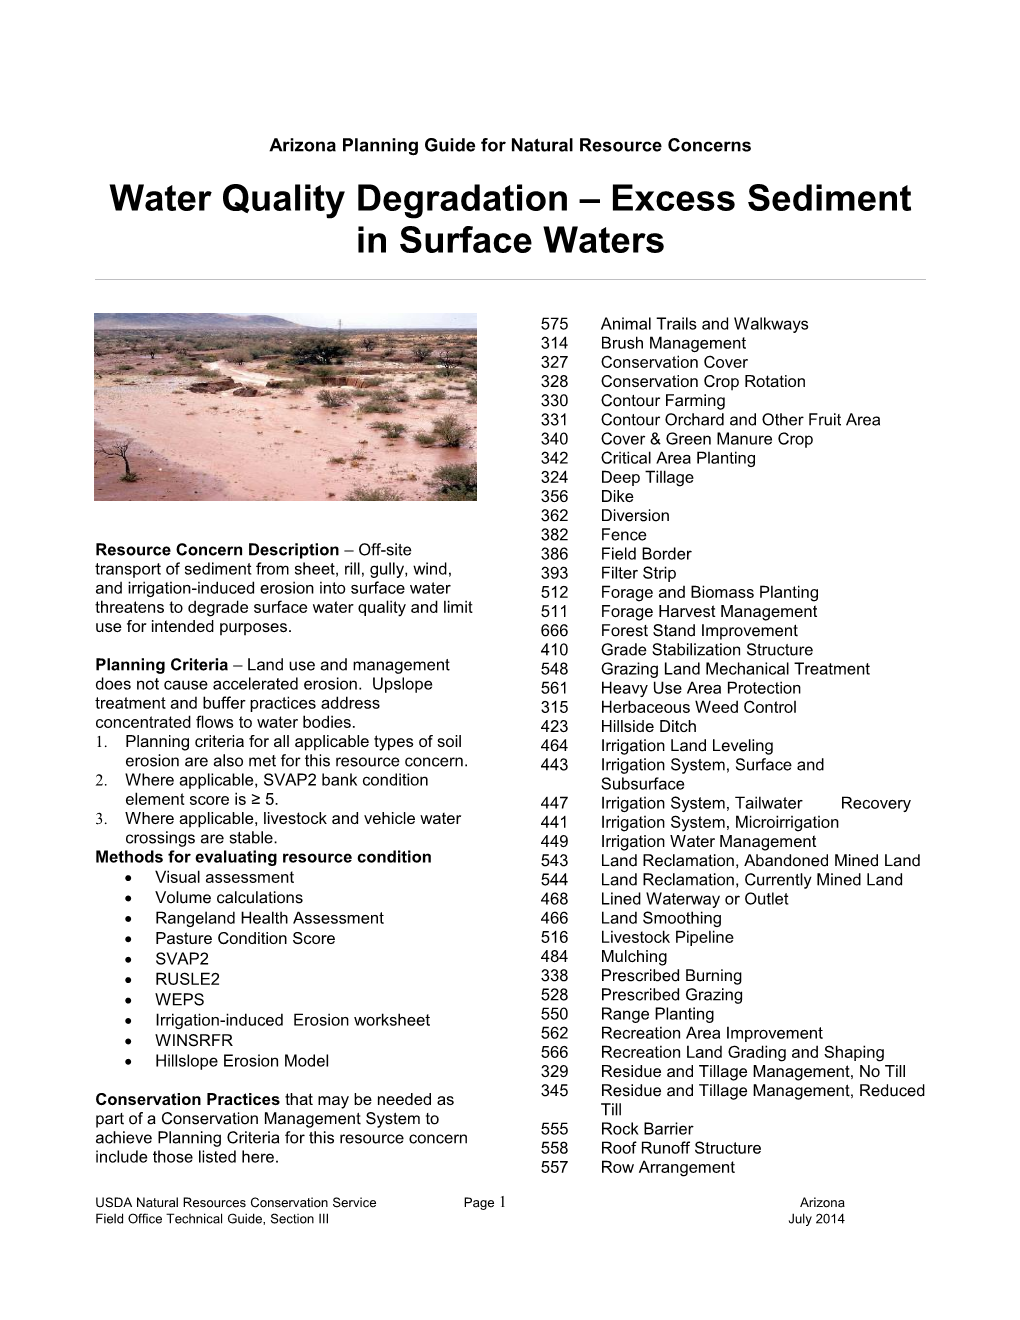 Water Quality Degradation Excess Sediment in Surface Waters